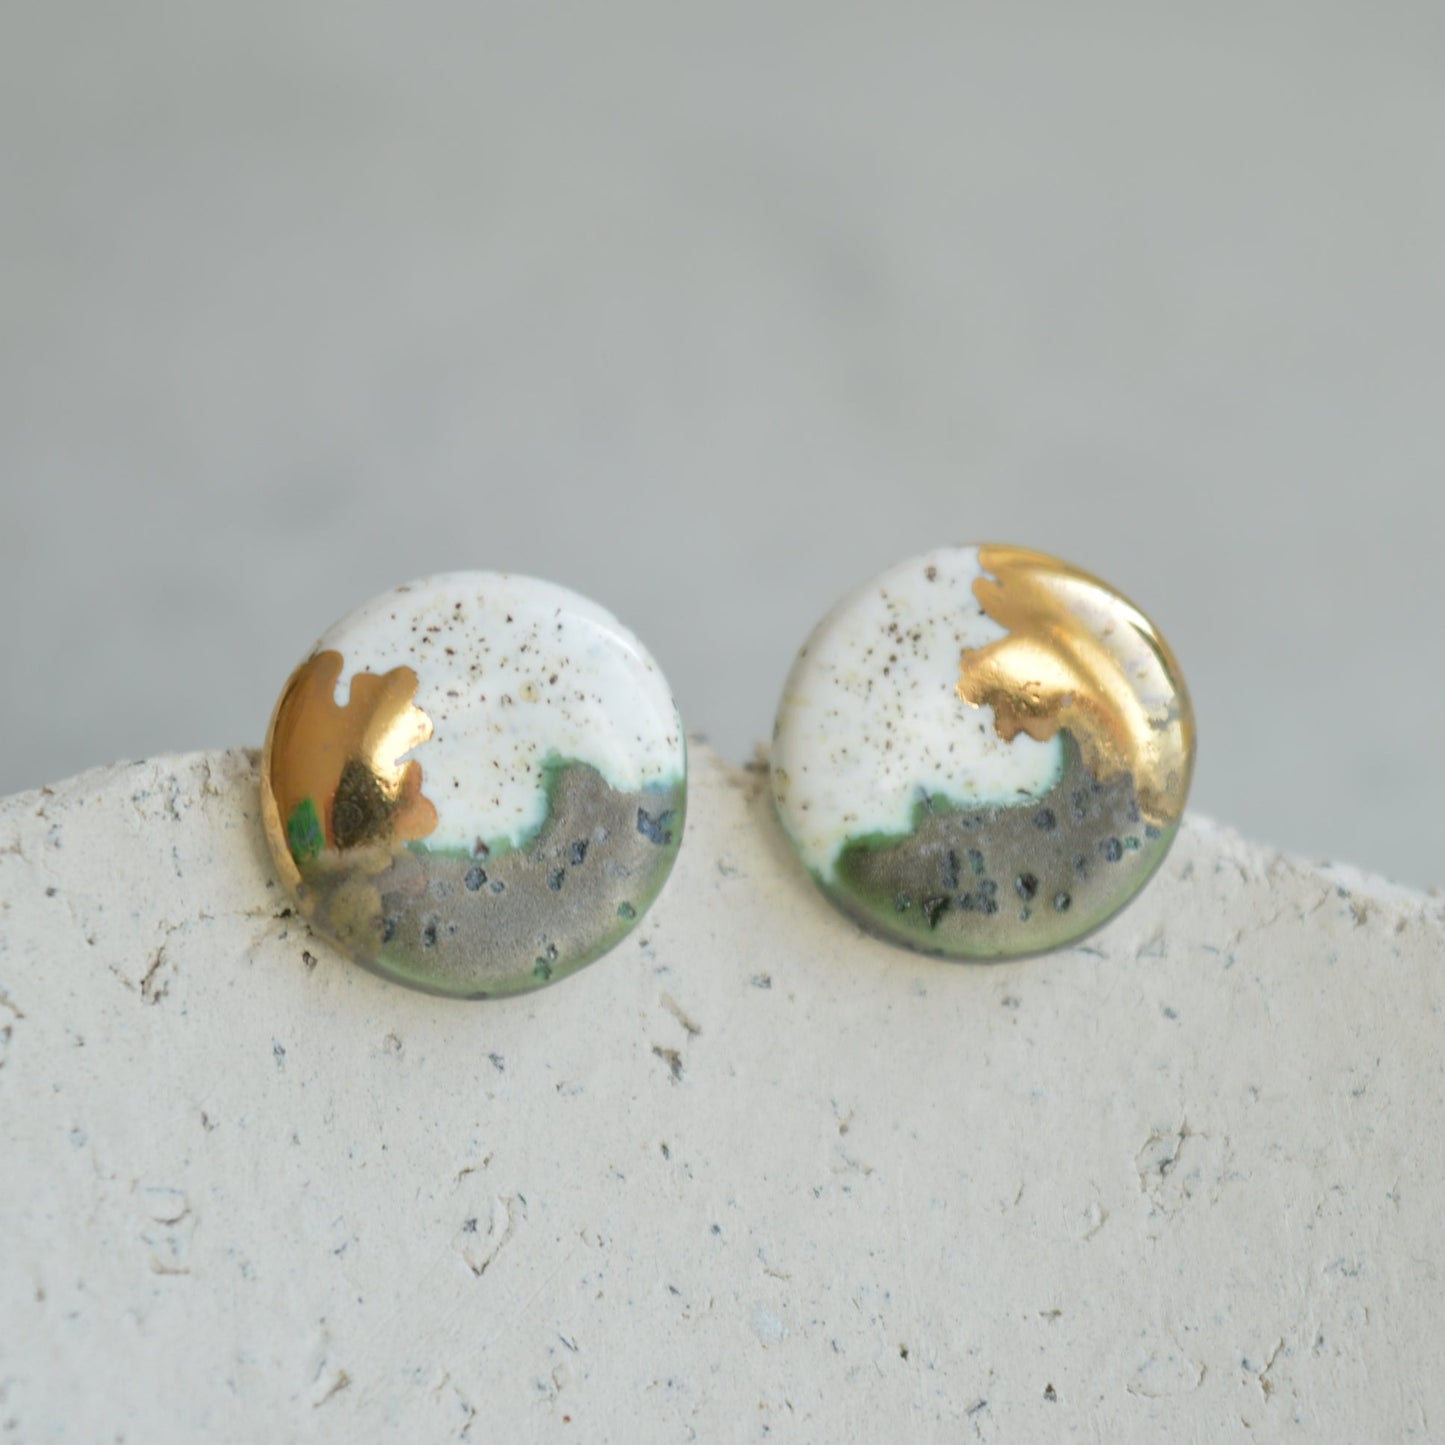 ceramic earrings with gold